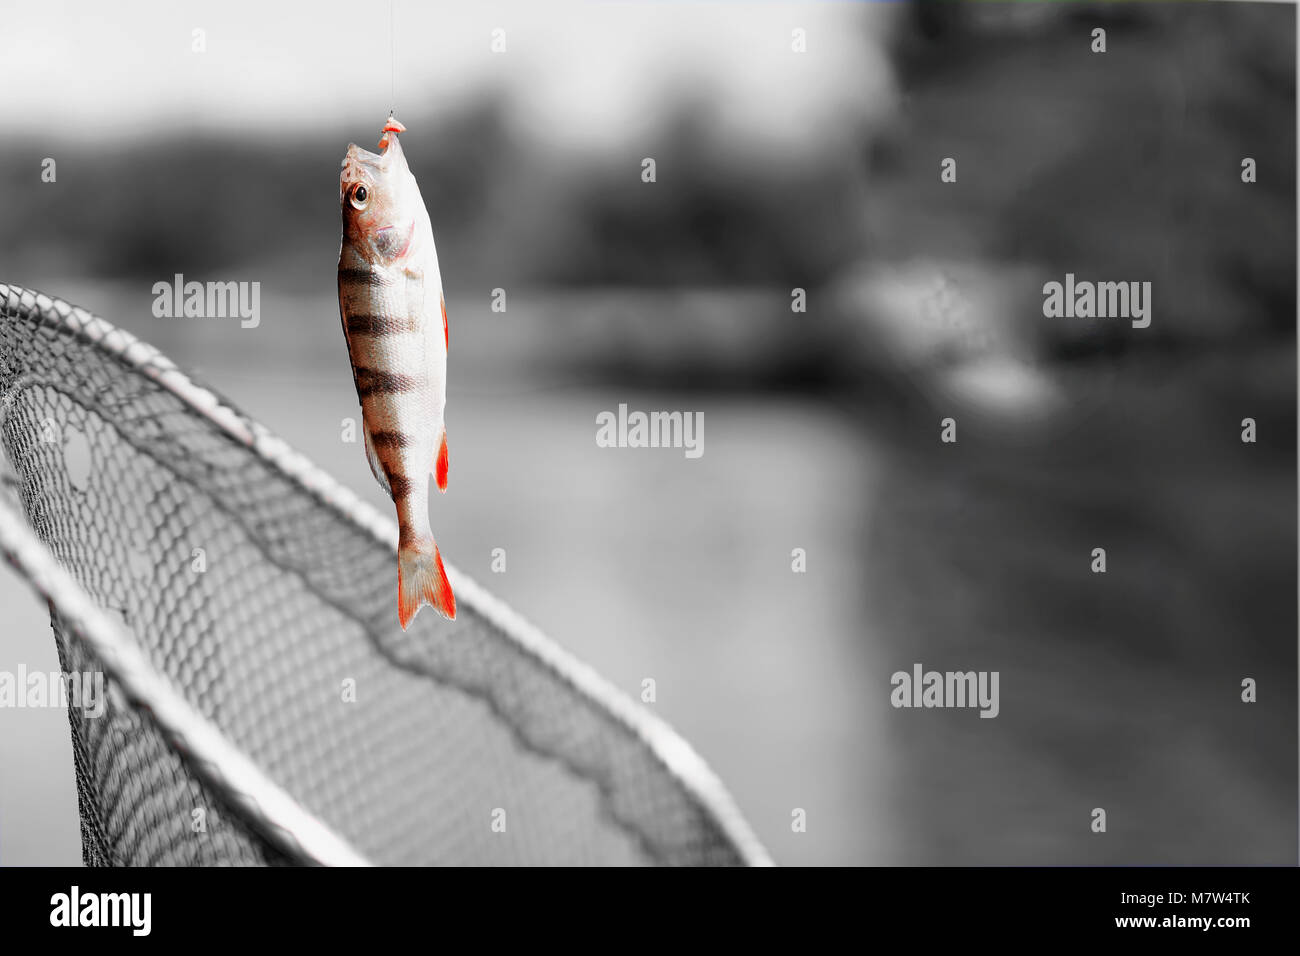 Small Fish Hanging on a Fishing Line on the Background of Blue